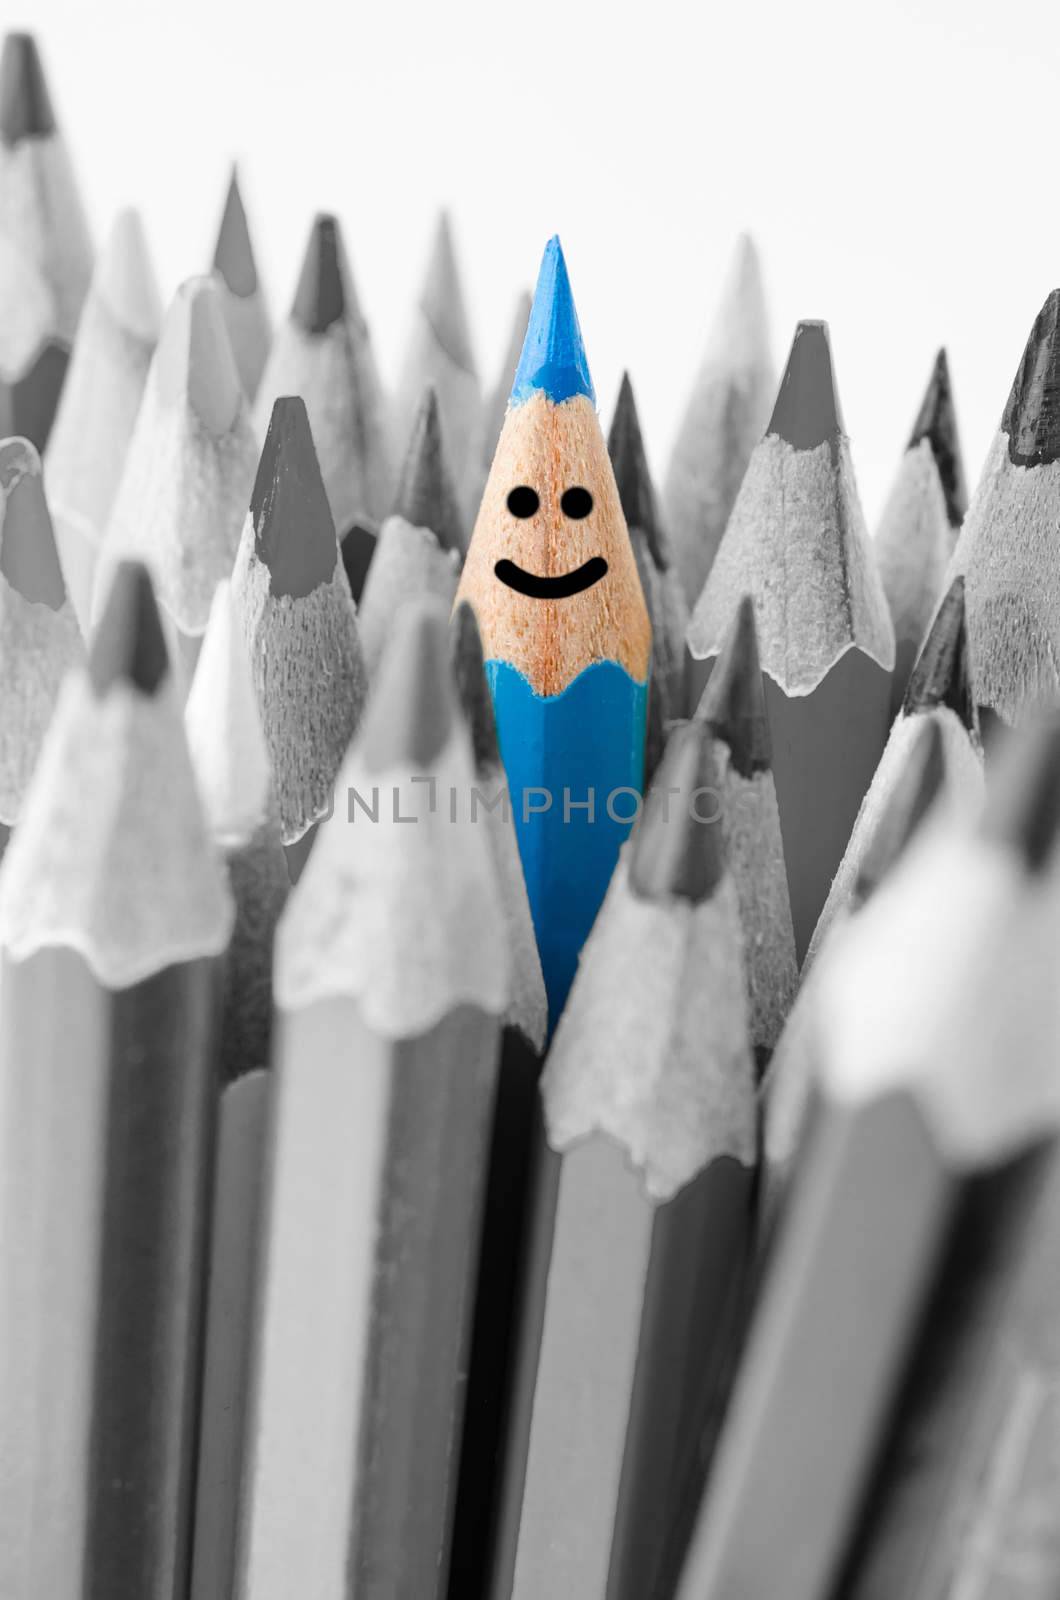 Focus blue color and no colouring crayon pencils on white background. Leadership concept.